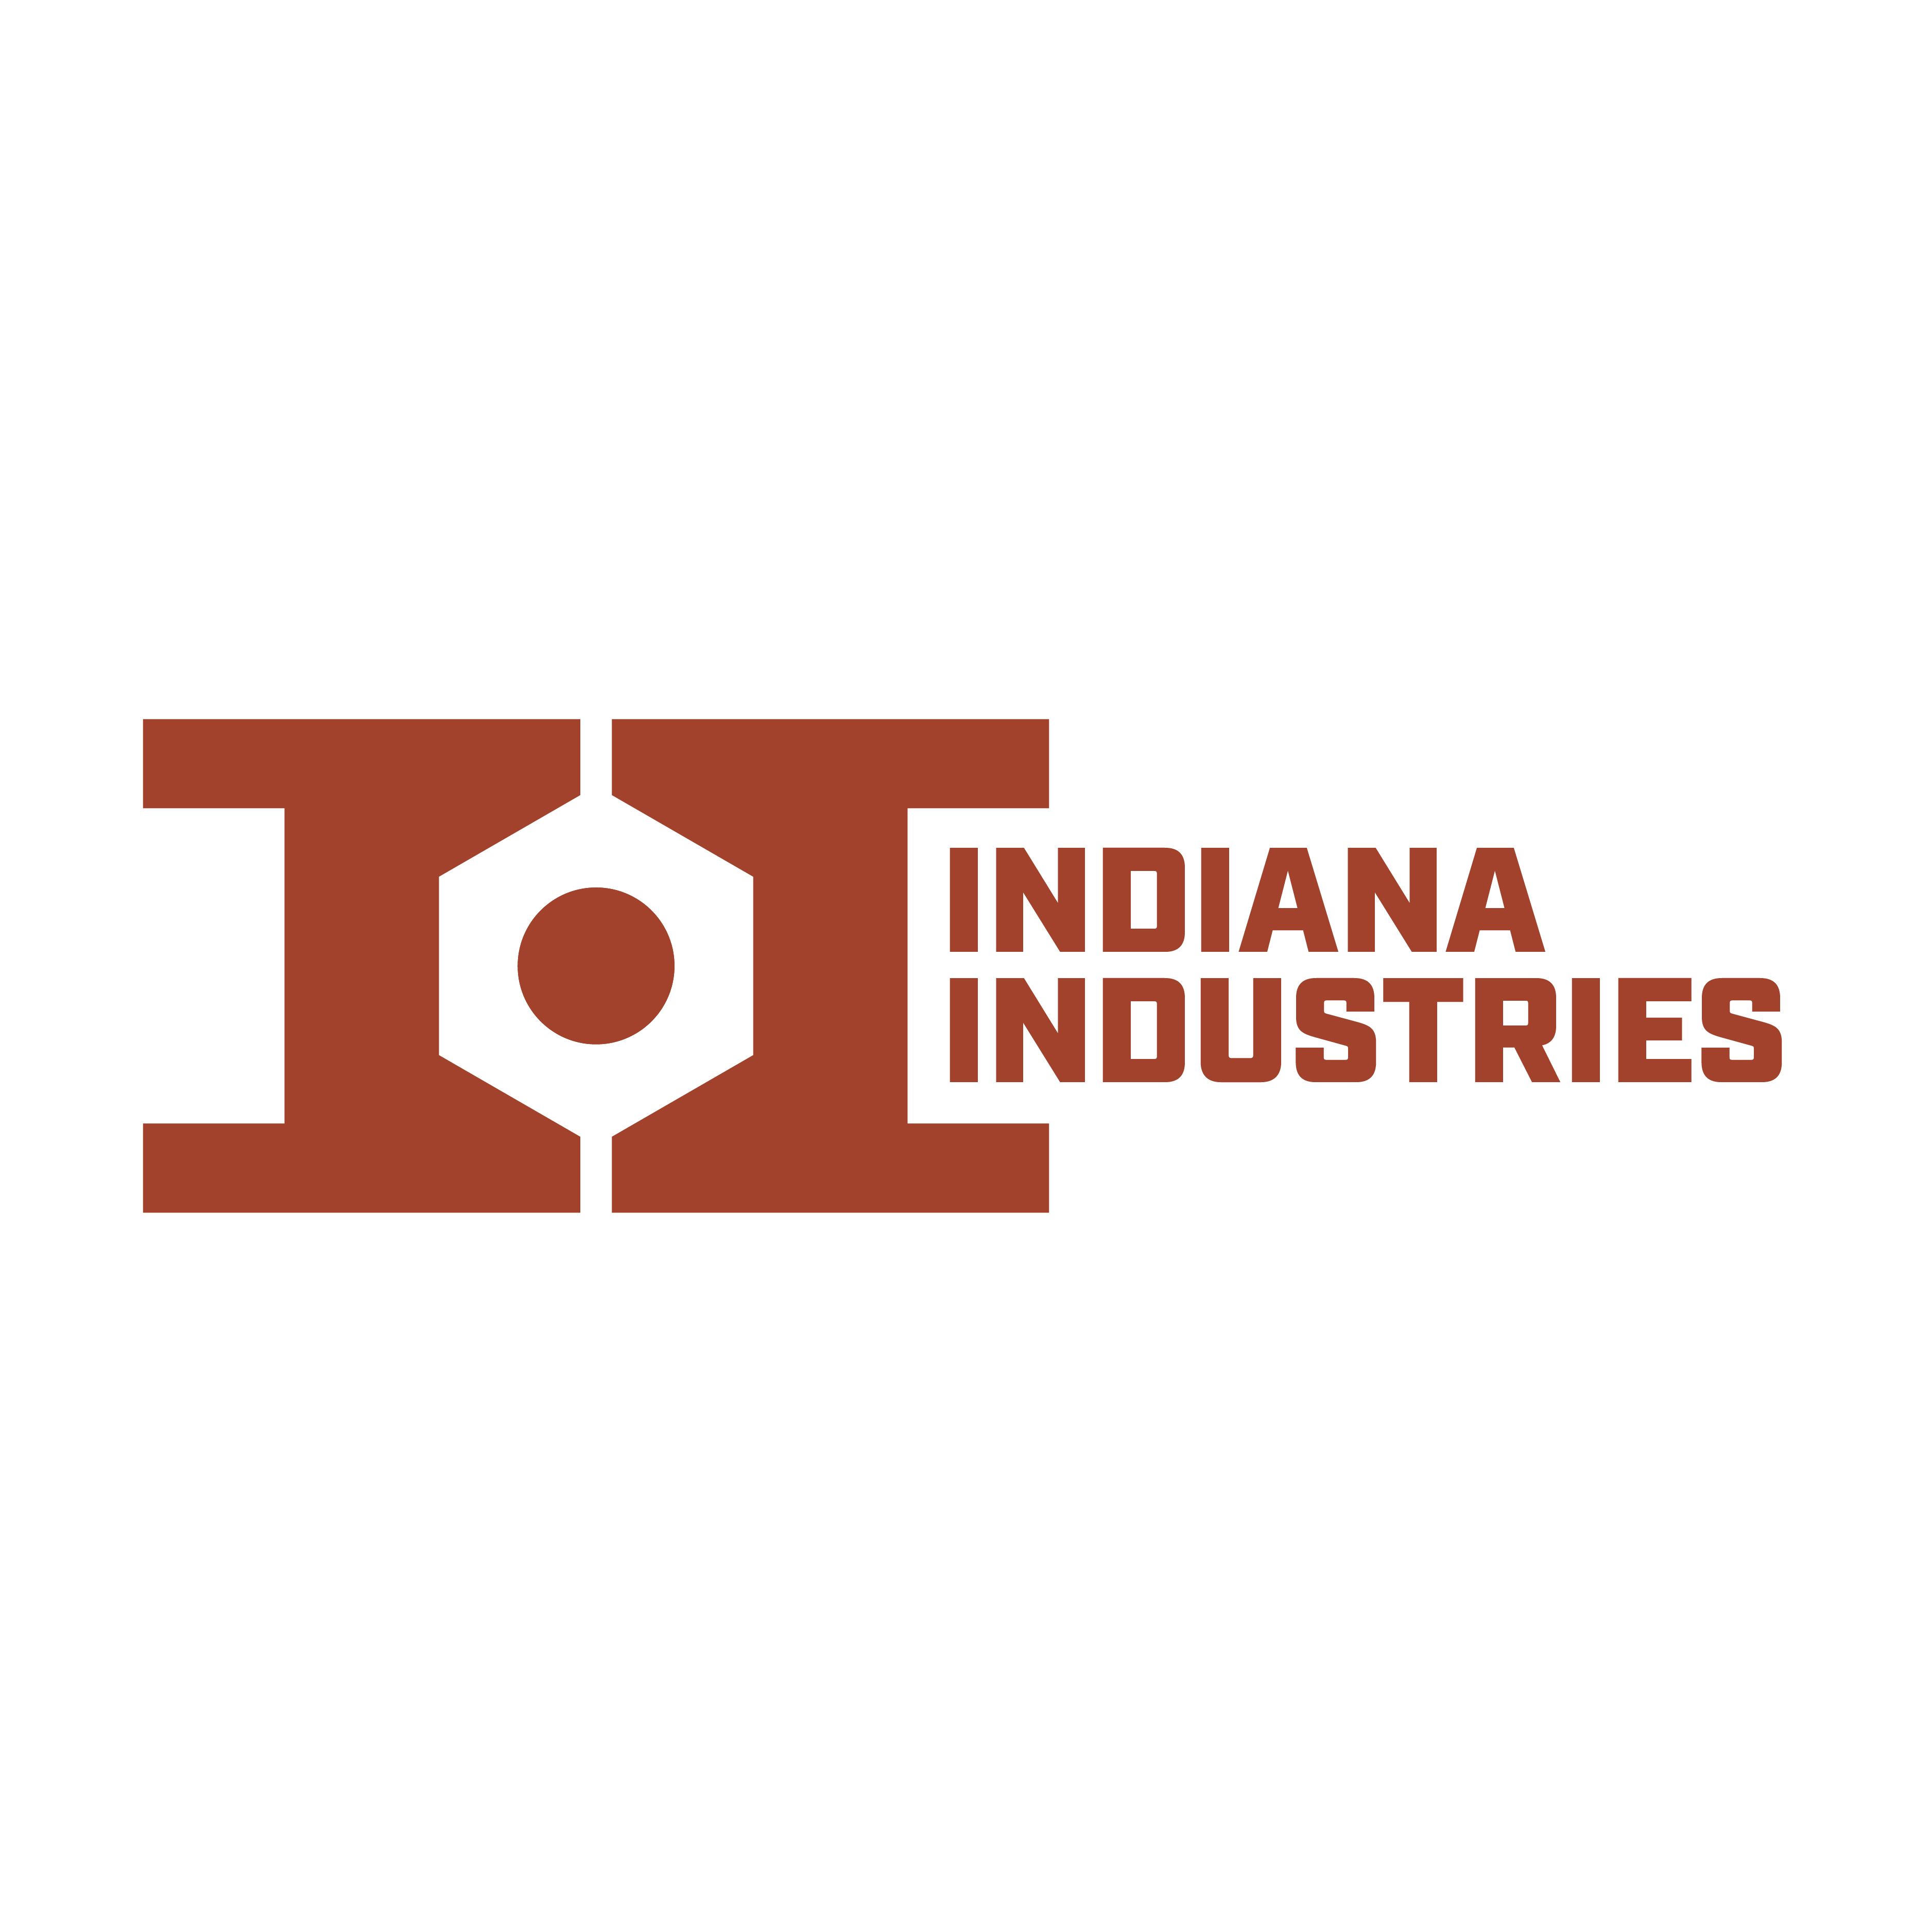 Indiana+Industries logo design by logo designer Abby+Ryan+Design for your inspiration and for the worlds largest logo competition